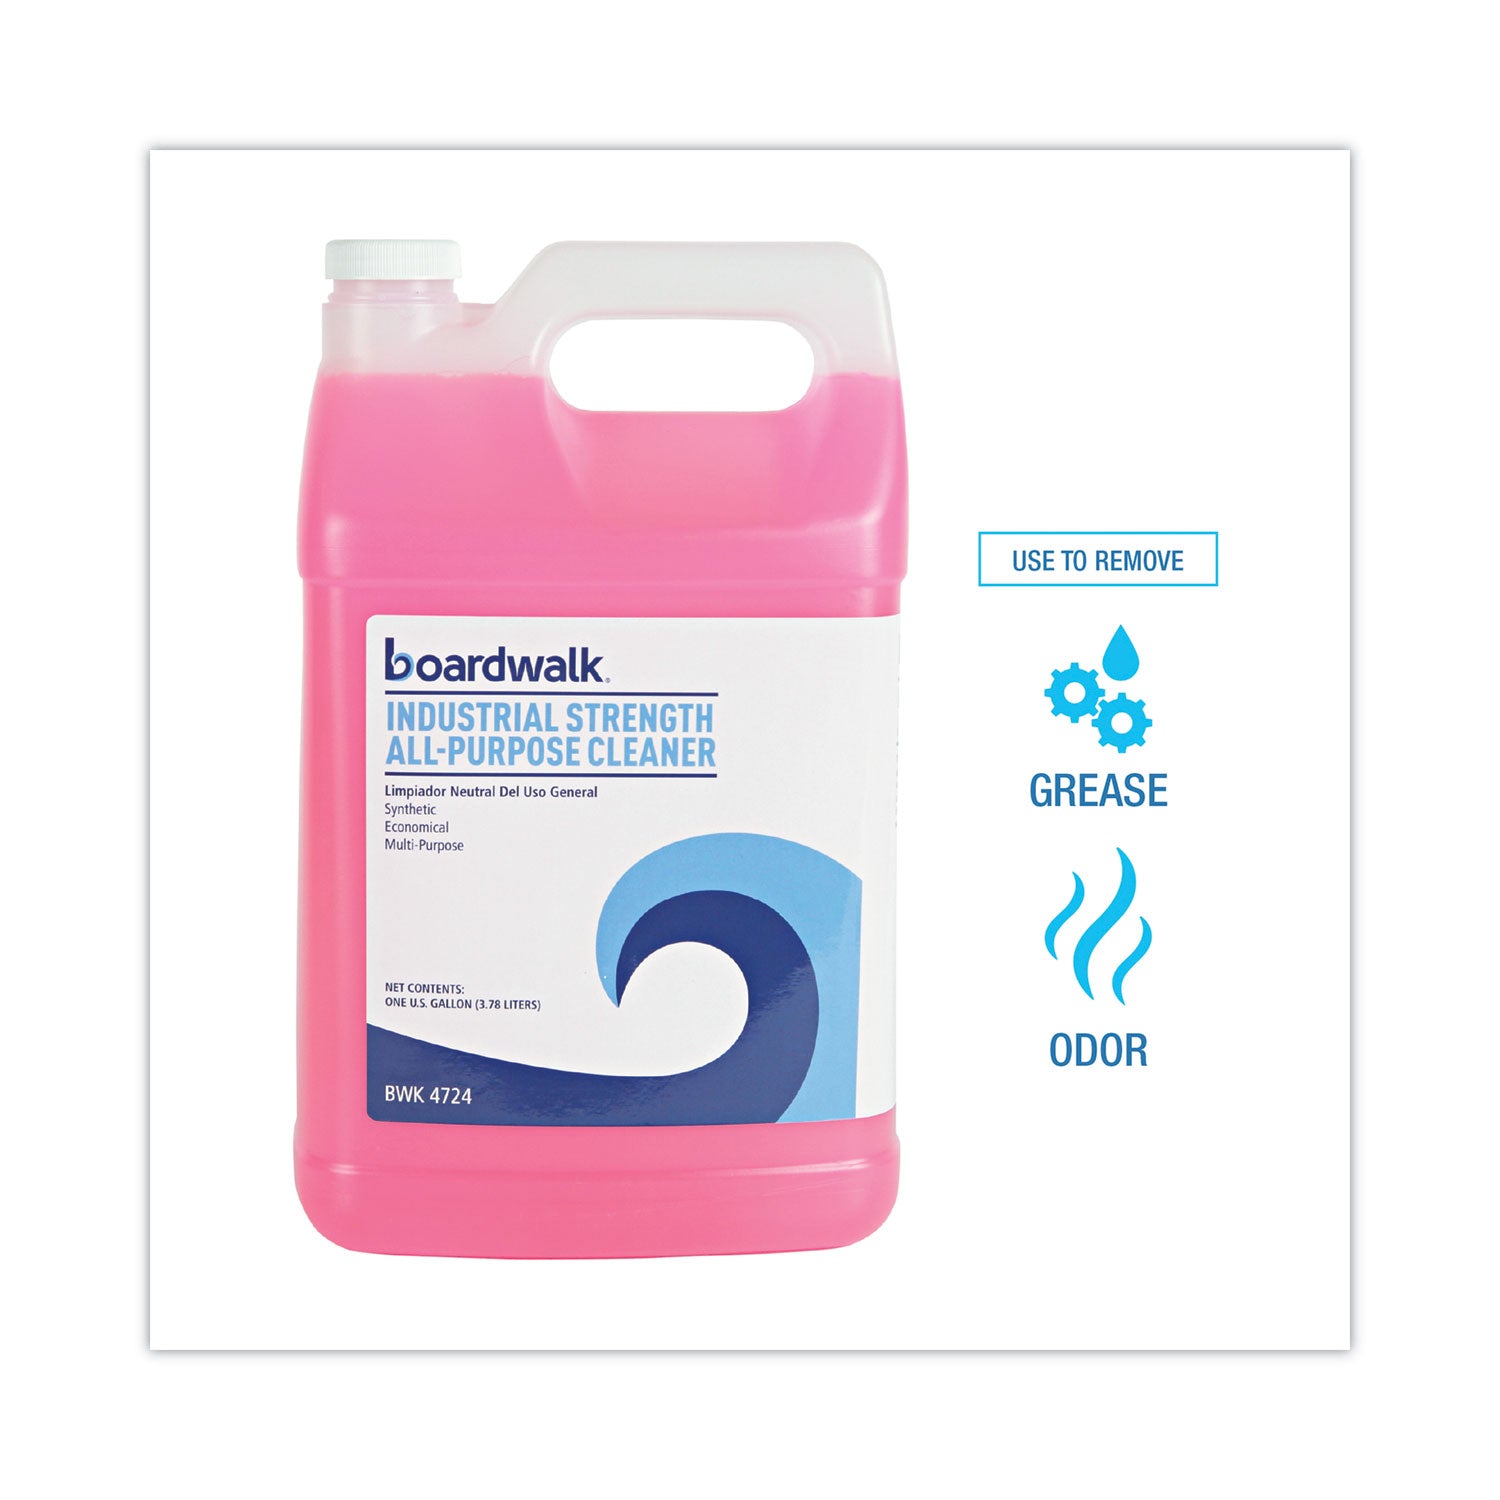 industrial-strength-all-purpose-cleaner-unscented-1-gal-bottle_bwk4724ea - 2